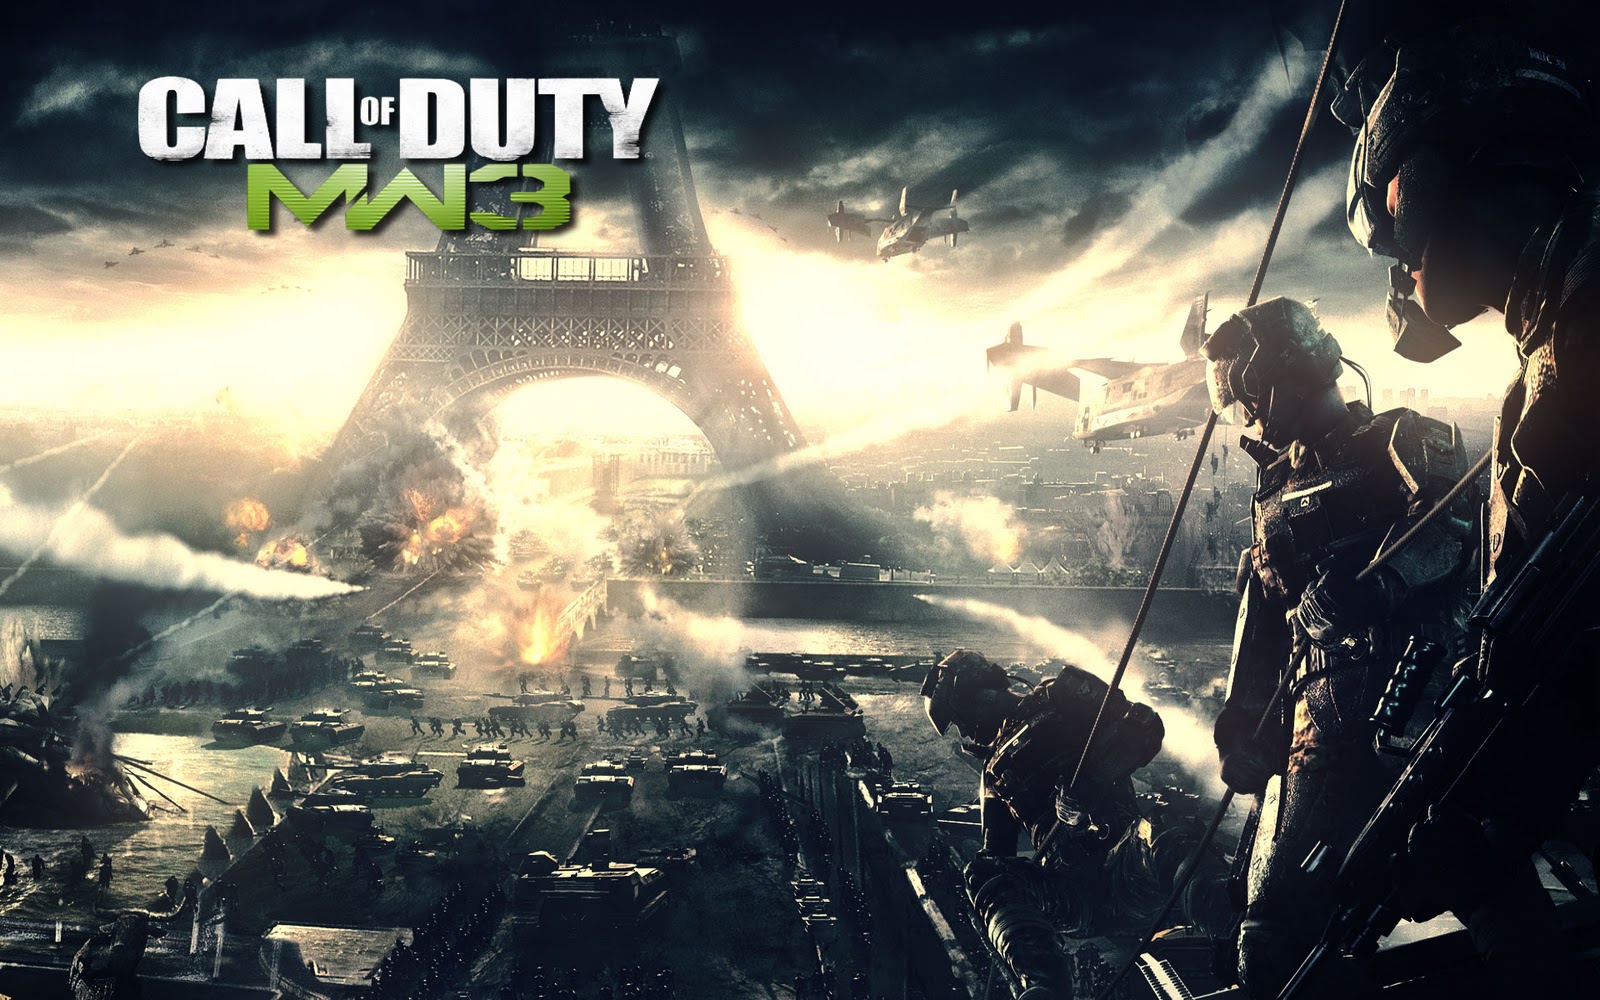 call of duty latest hd wallpapers call of duty latest hd wallpapers